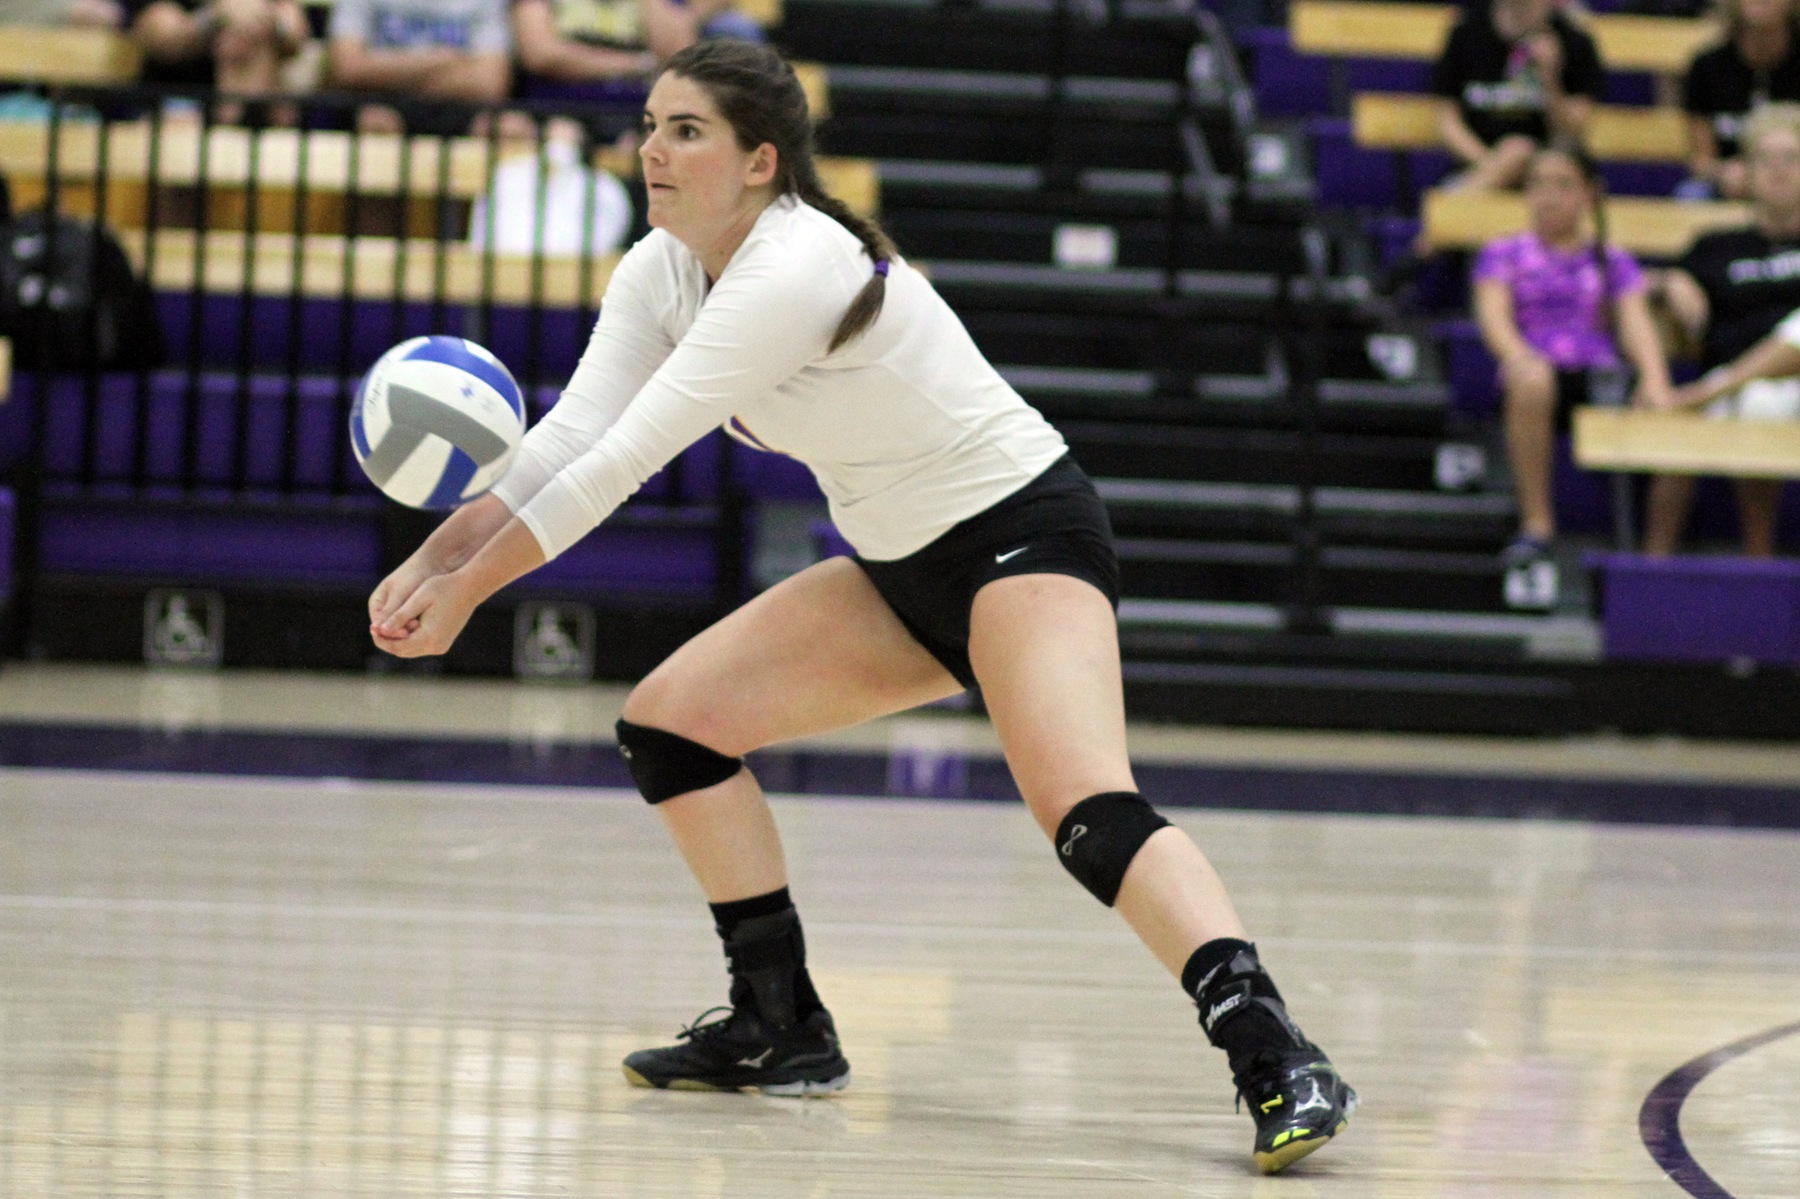 Mikayla Dobson contributed 11 digs and four service aces against Chapman (Photo: Tracy L. Olson).